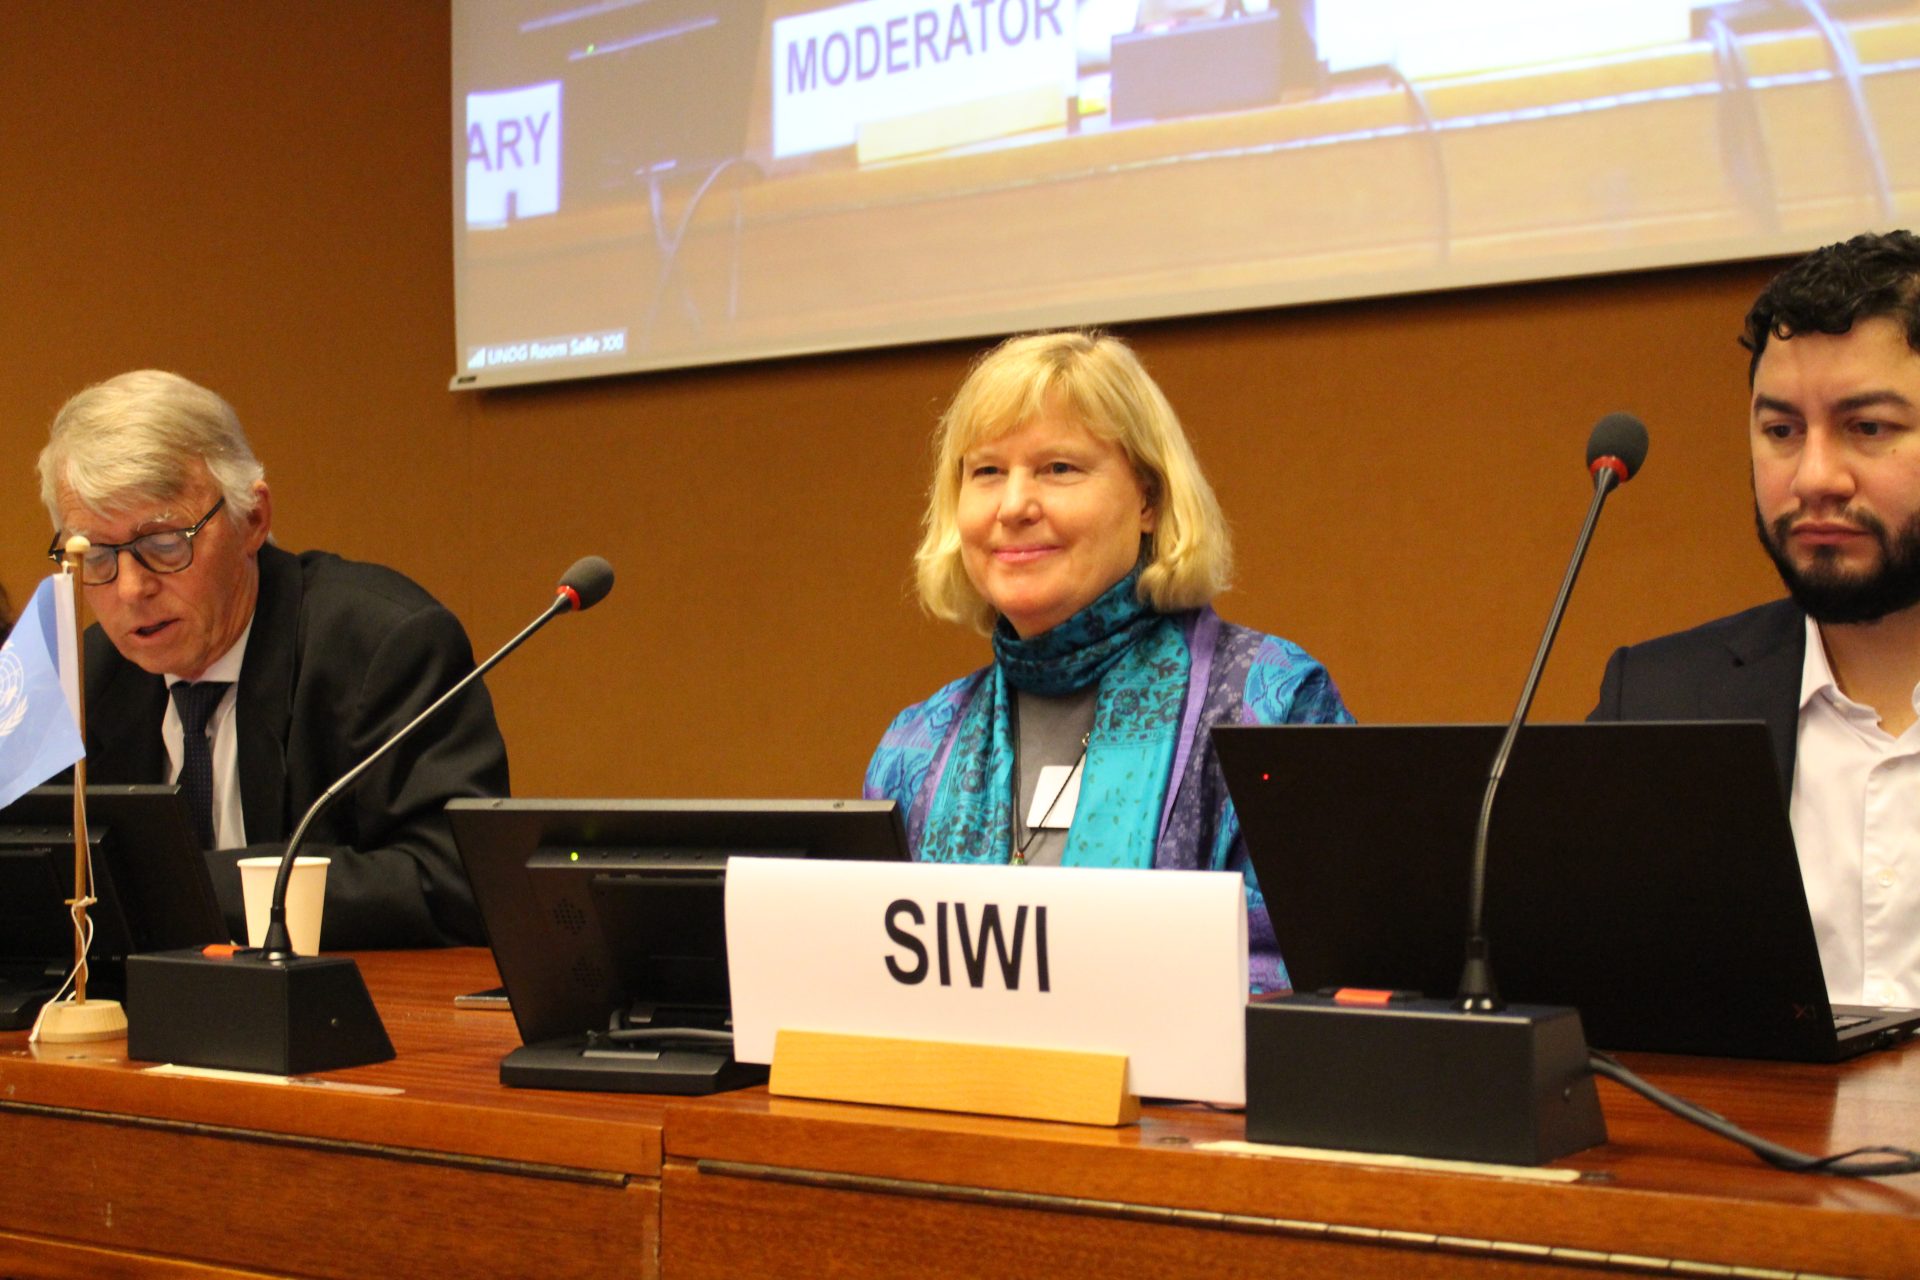 Two people sitting in front of a conference with a screen behind them and sign that states SIWI in front of the table